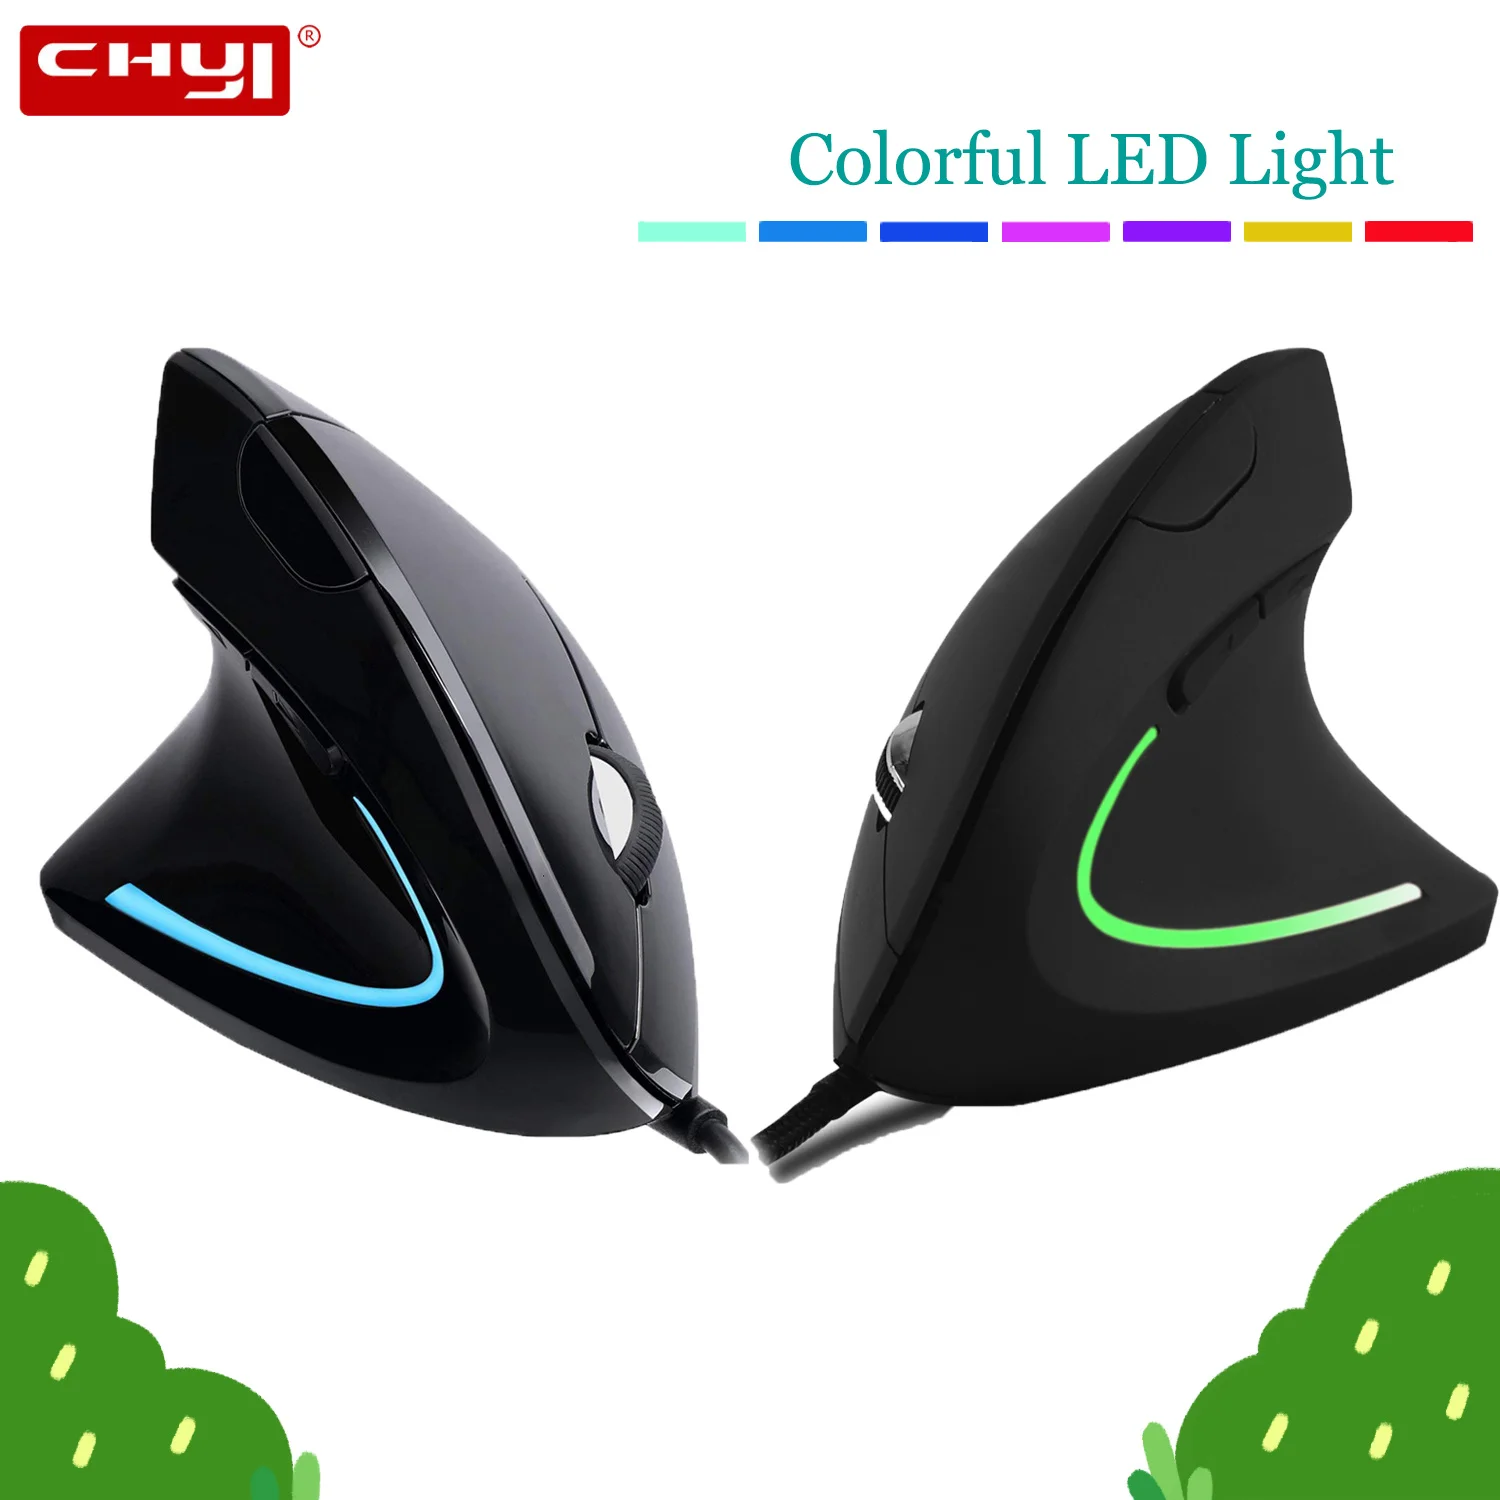 

Vertical Ergonomic Mouse USB Wired With LED Light 800/1200/2000/3200 DPI Wrist Healthy Office Mice For PC Desktop Laptop